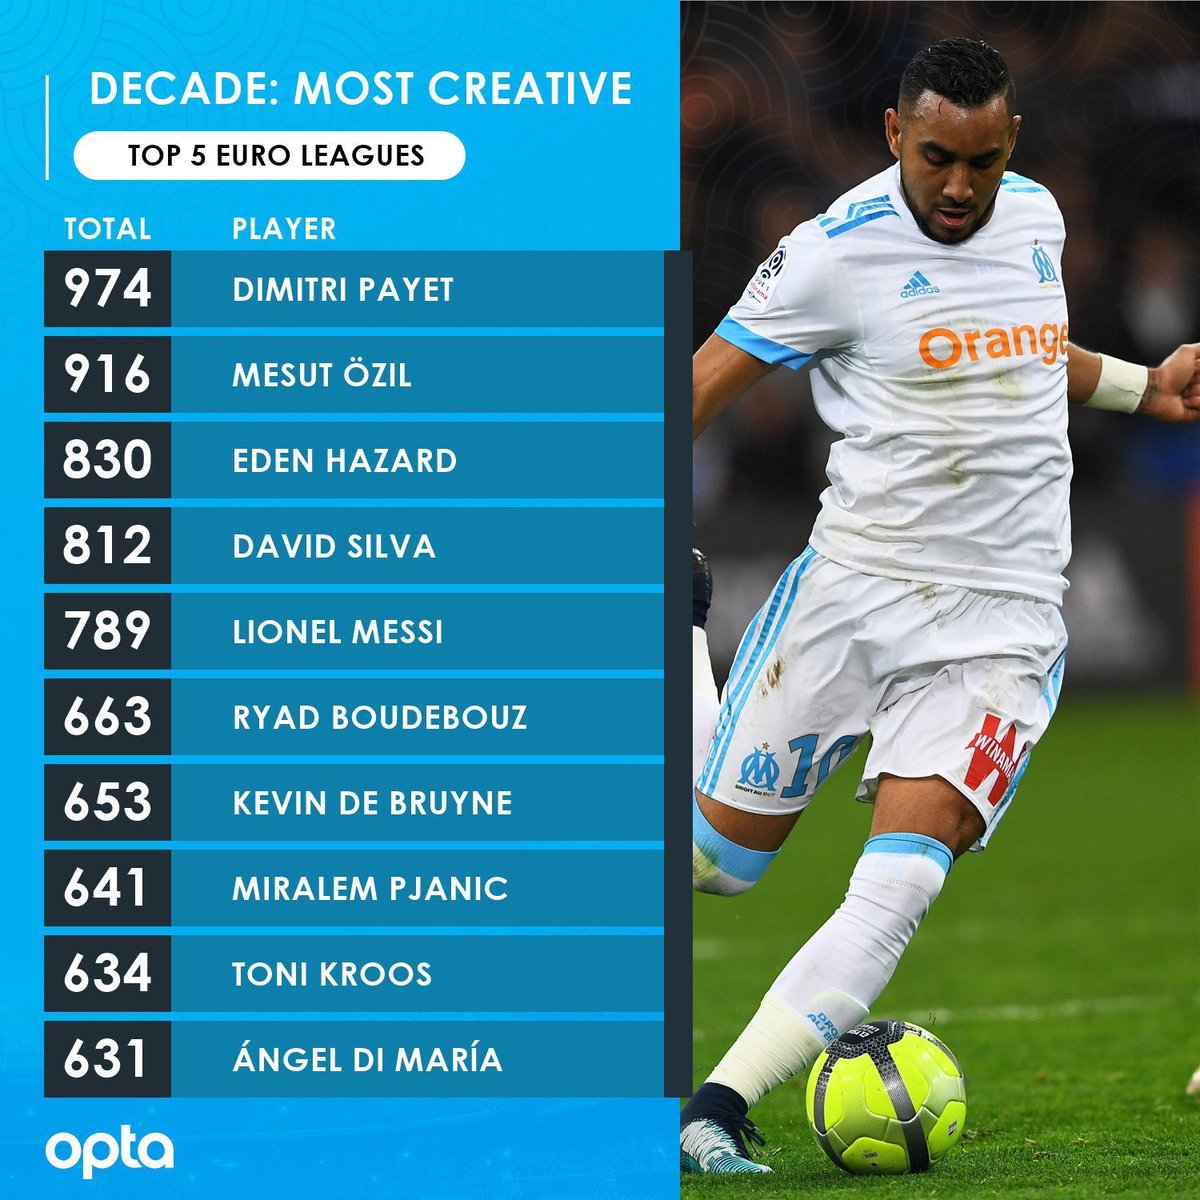 Hazard created the most chances from open play in Europe’s top 5 leagues the last decade. And even when adding set-pieces he’s still top 3, while being the only player in that list below who doesn’t take set pieces at all.